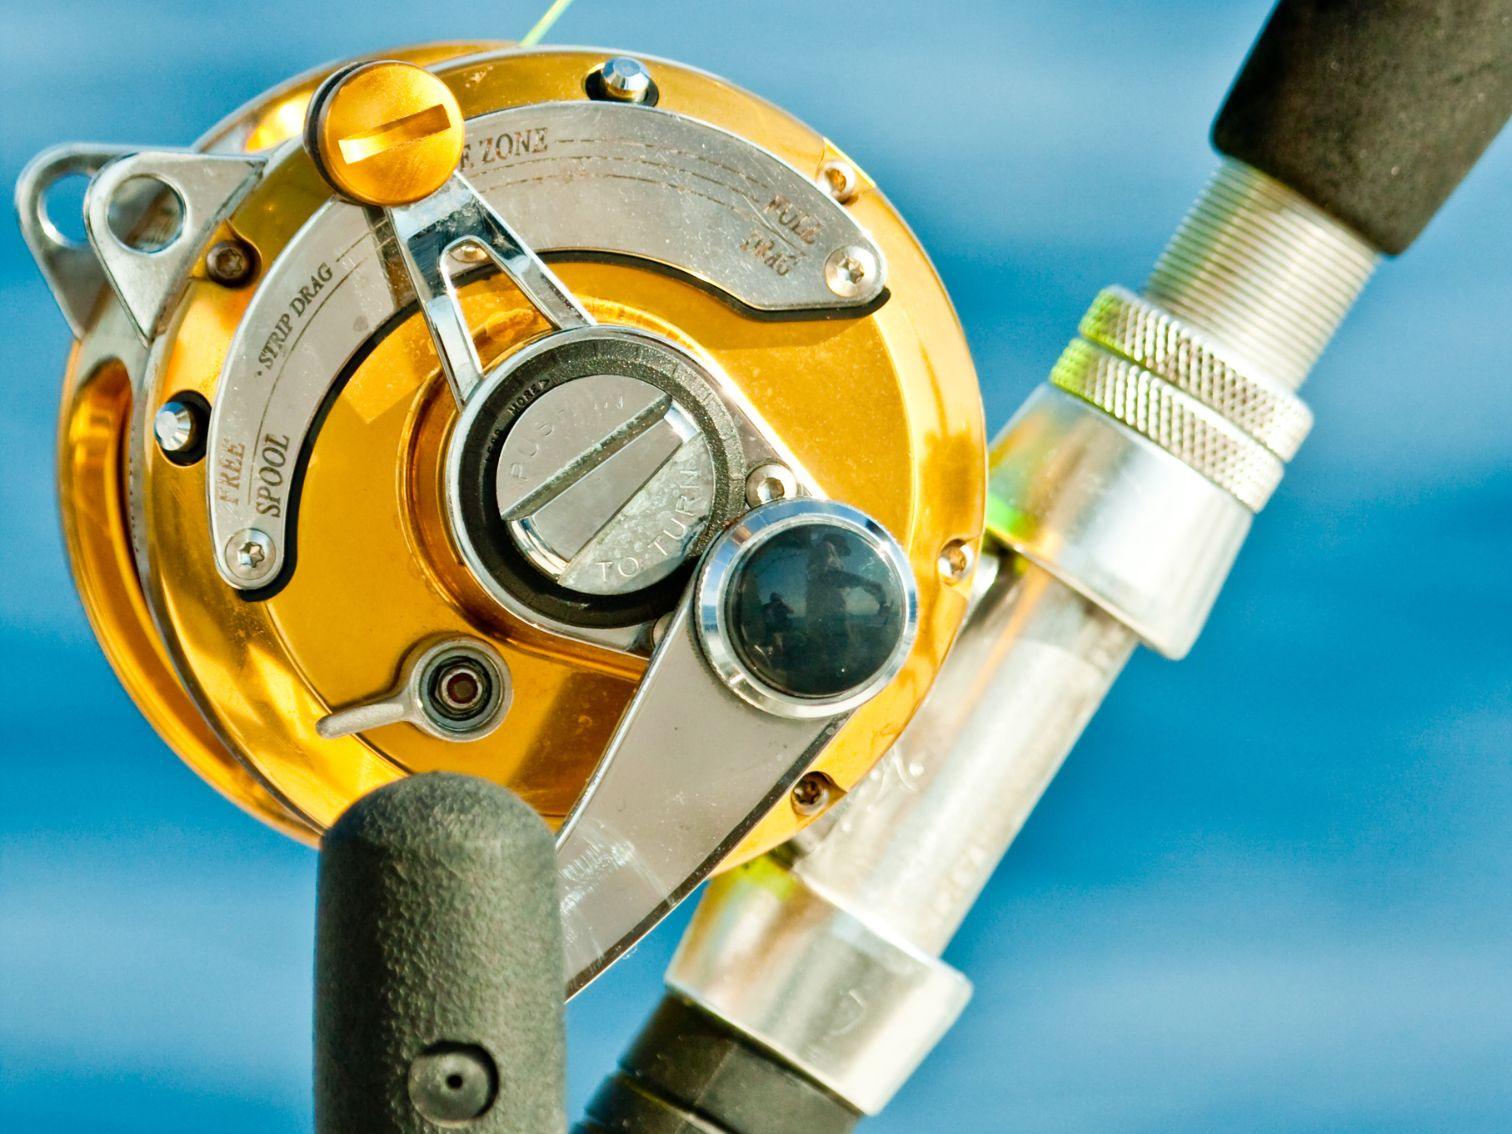 Minimum acceptable drag pressure - Fishing Rods, Reels, Line, and